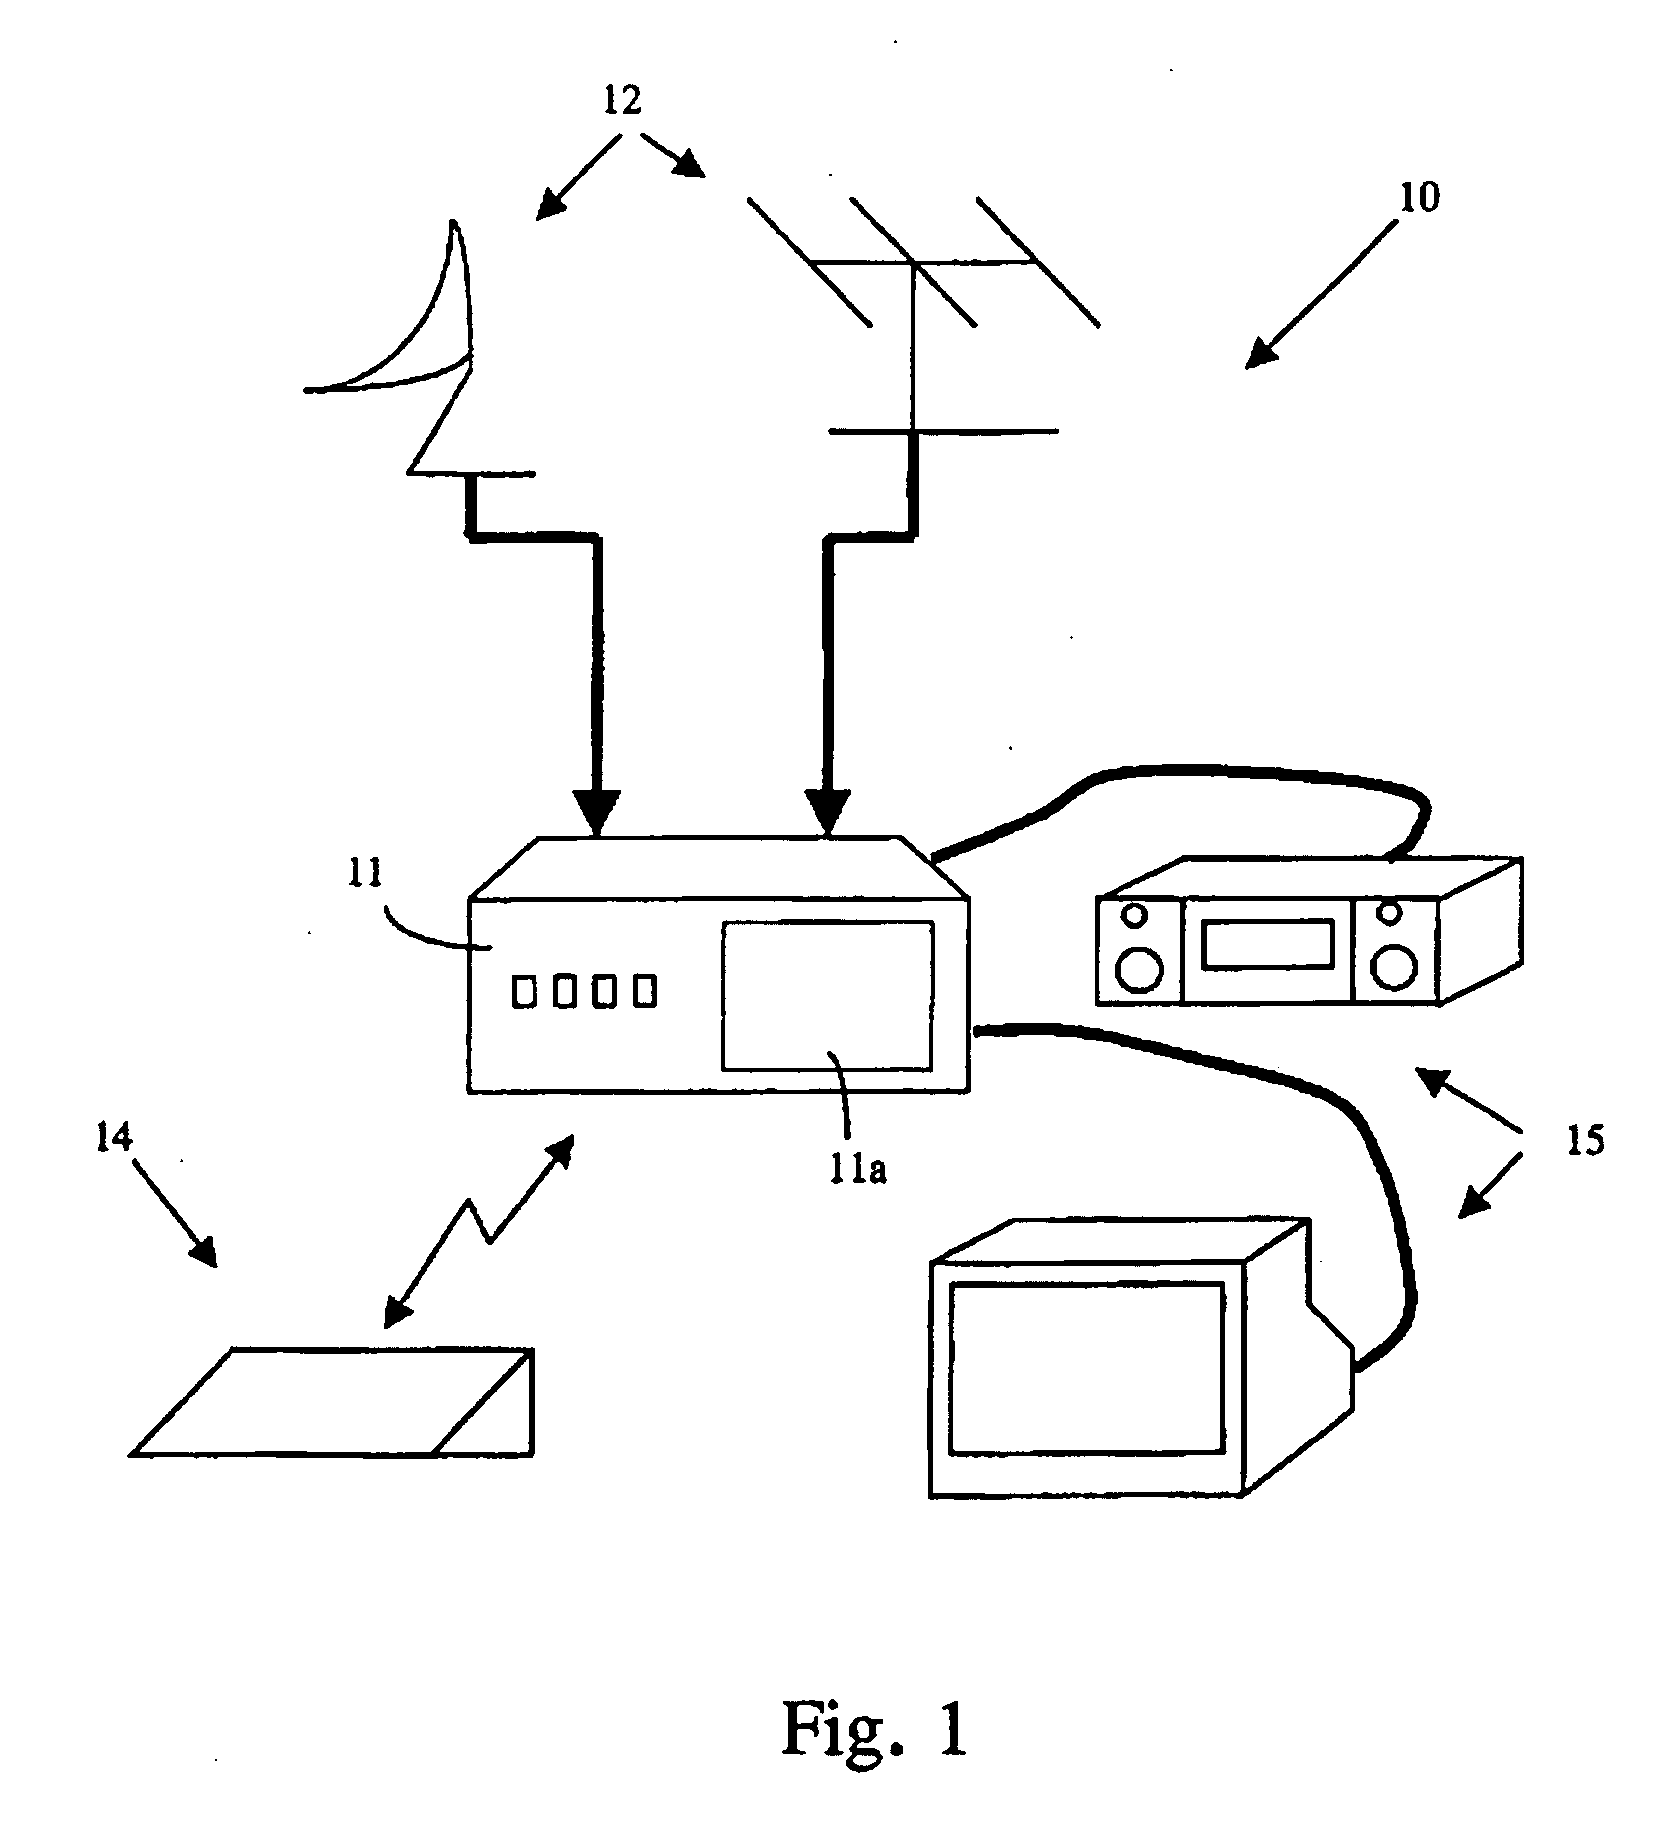 Device, system and method for programming events